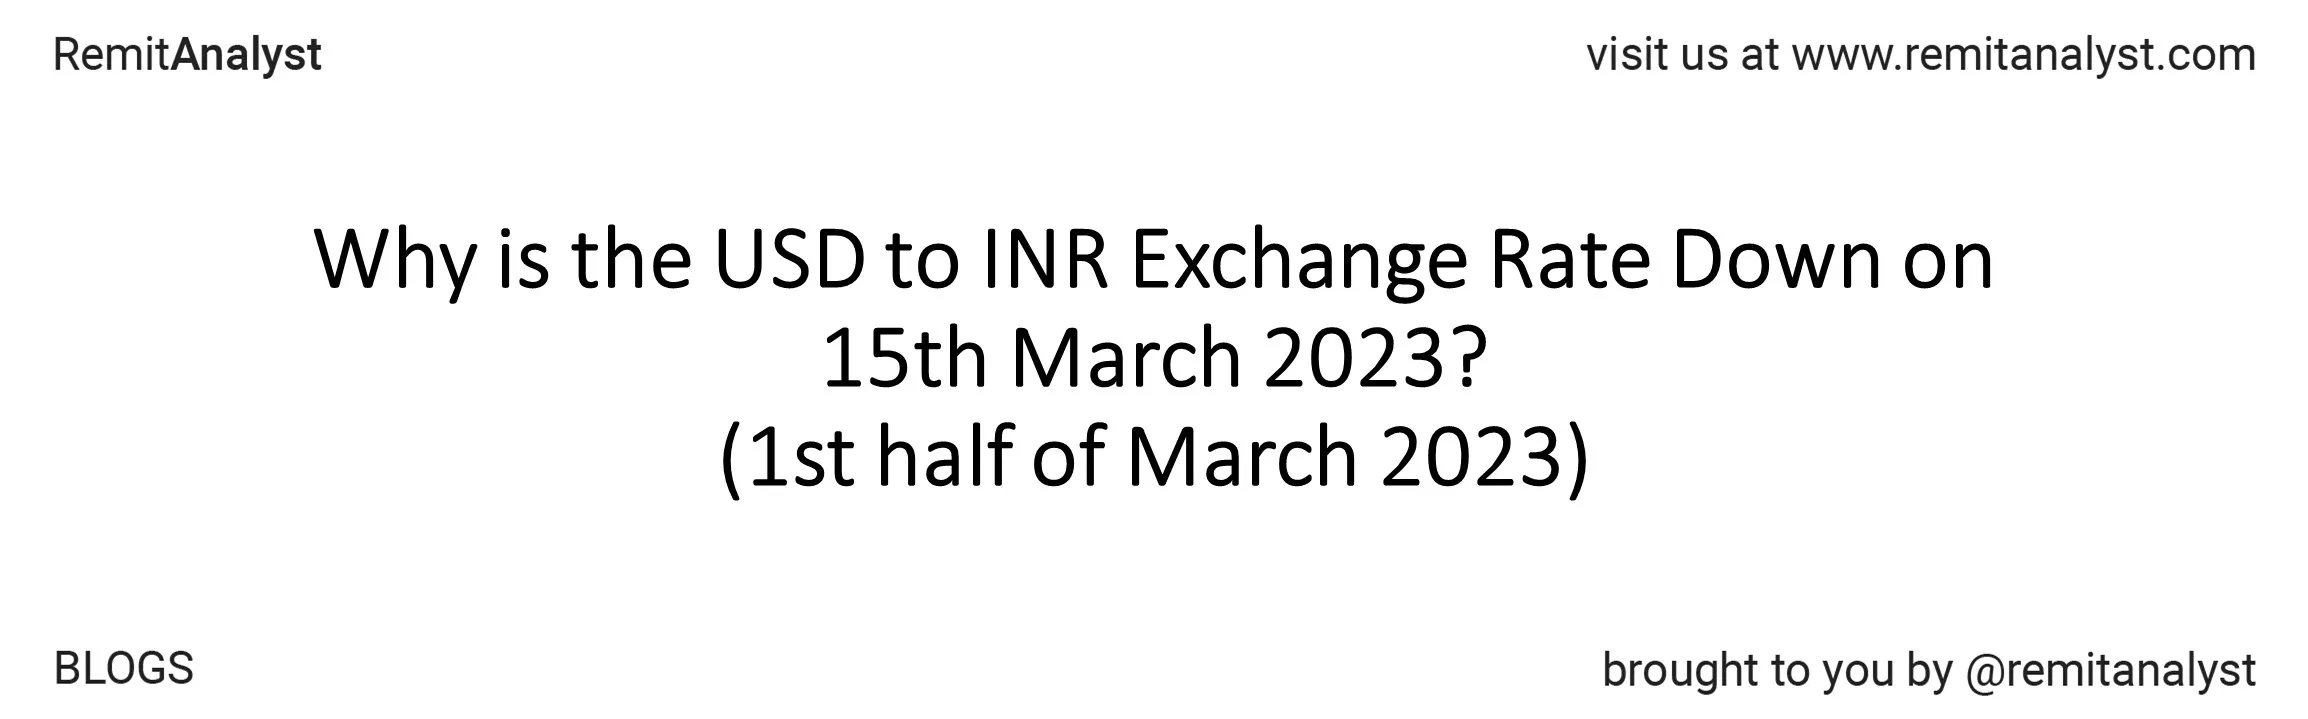 usd-to-inr-exchange-rate-1-mar-2023-to-15-mar-2023-title